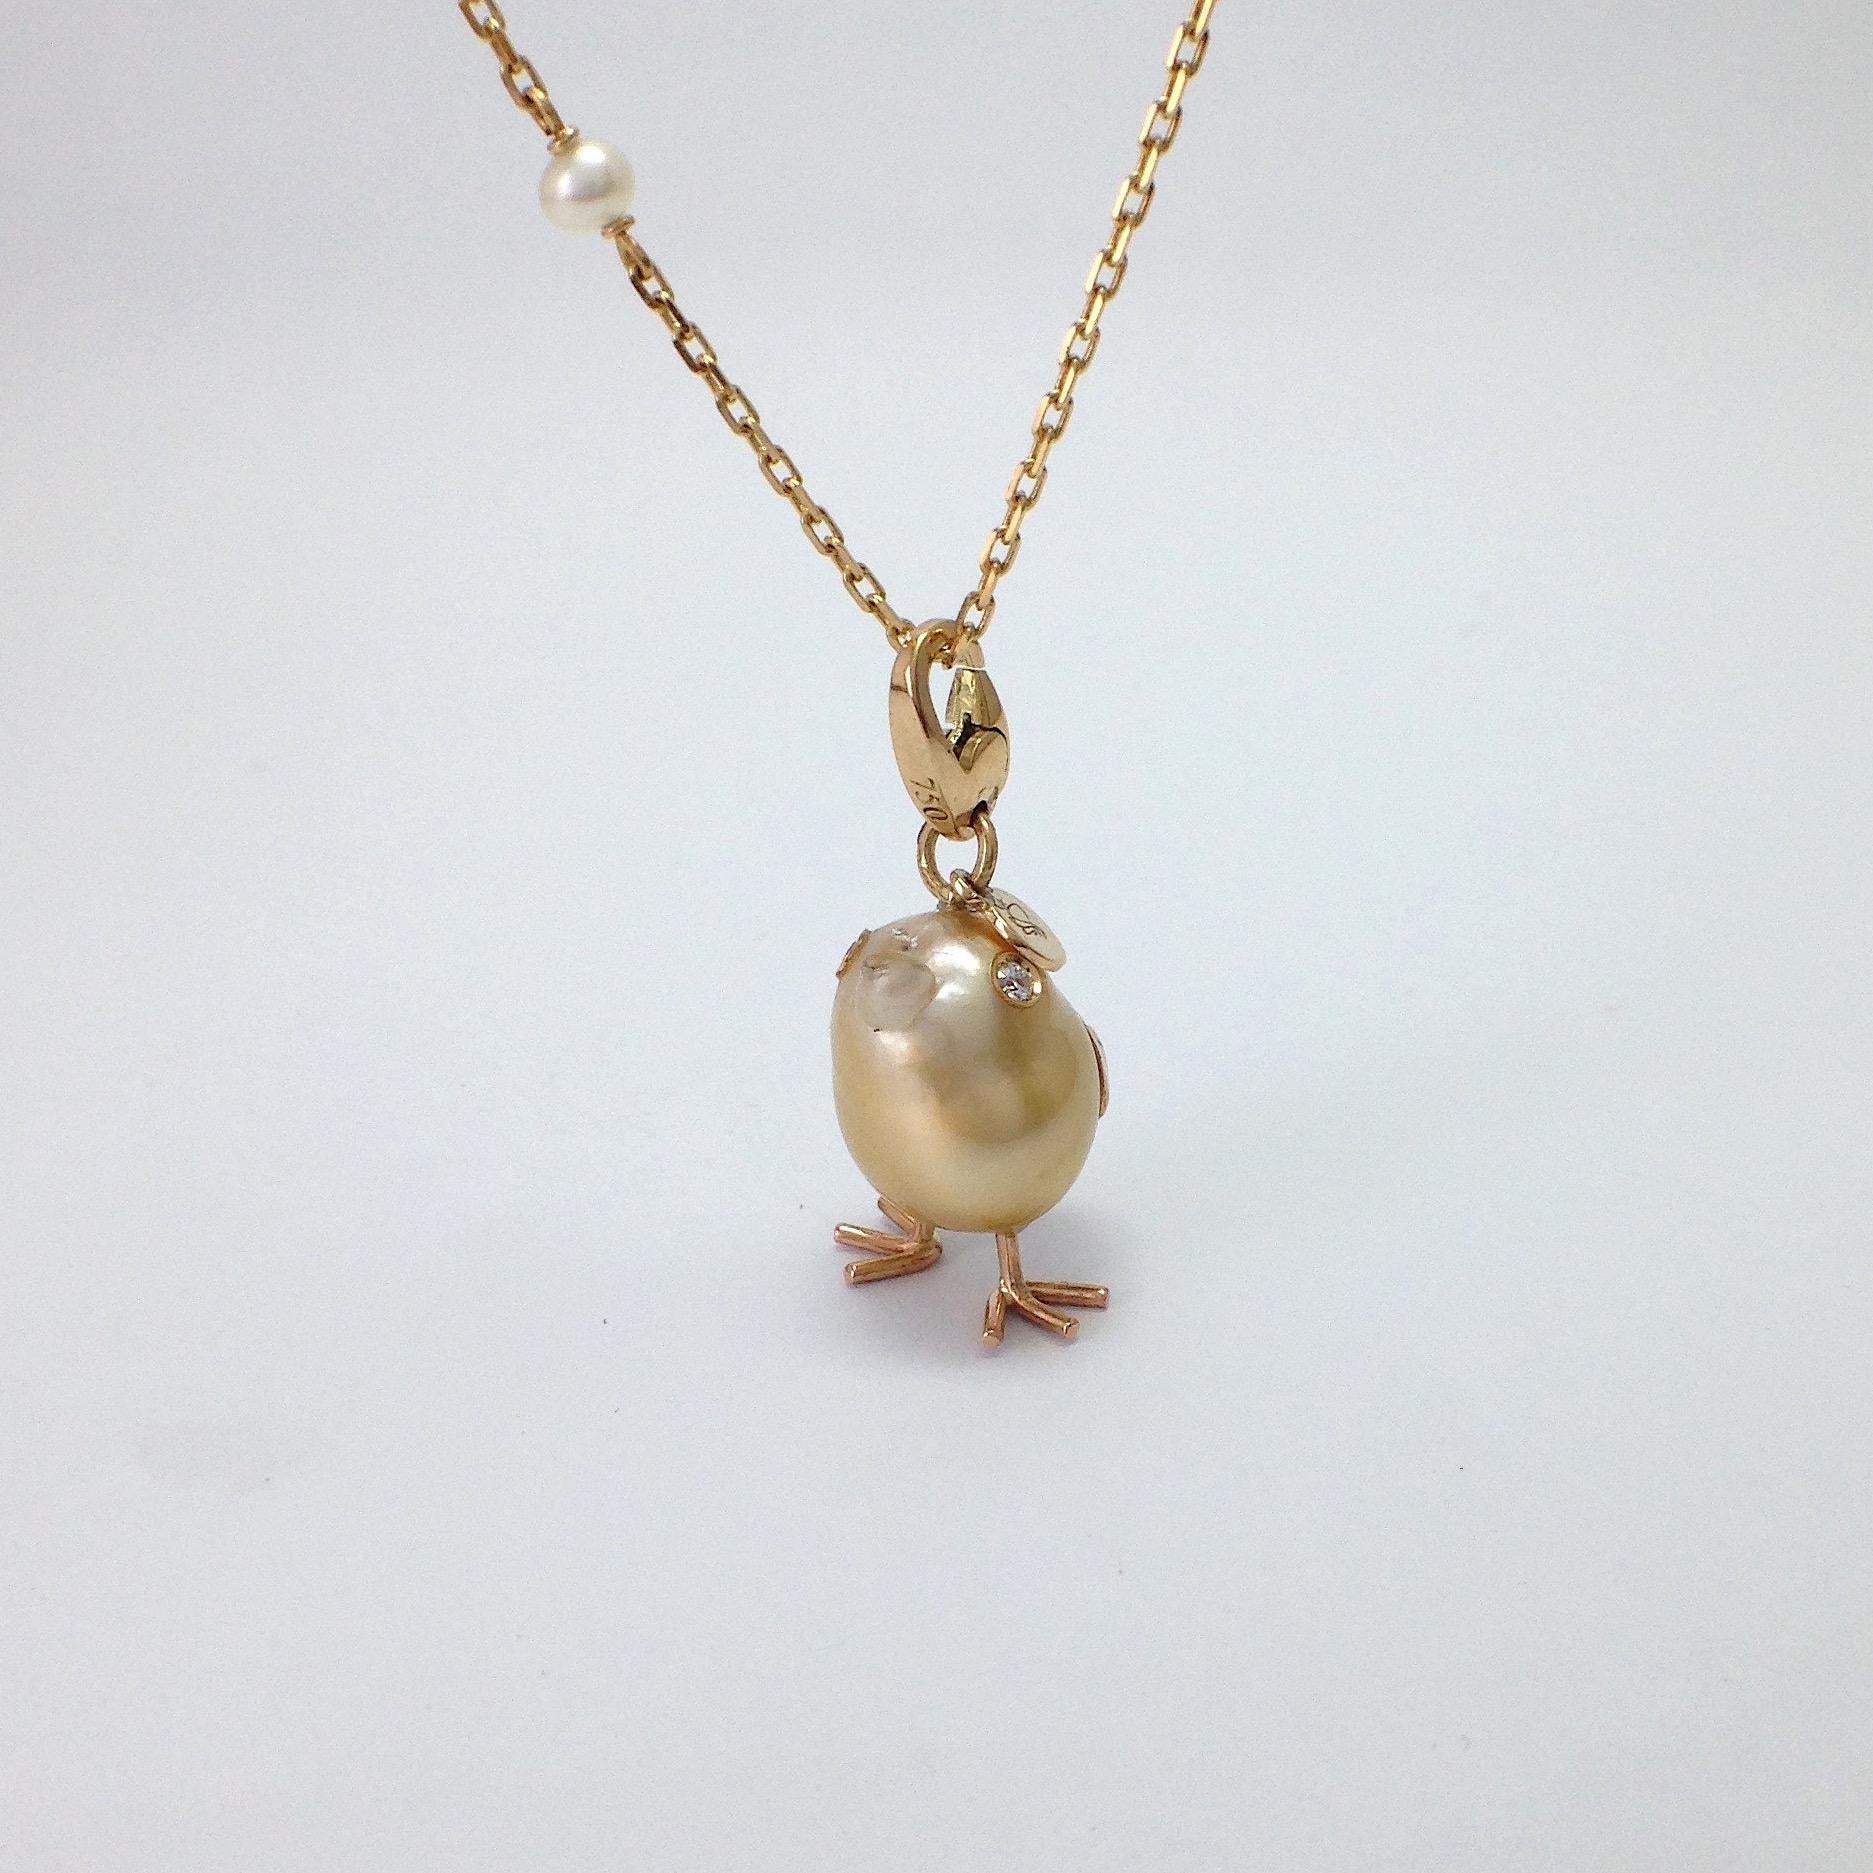 Chick Australian Pearl Diamond Yellow 18 Kt Gold Pendant or Necklace
An Australian pearl has been carefully crafted to make a chick. 
It has his two legs, two eyes encrusted with two white diamonds and his beak. 
The gold is yellow for all the